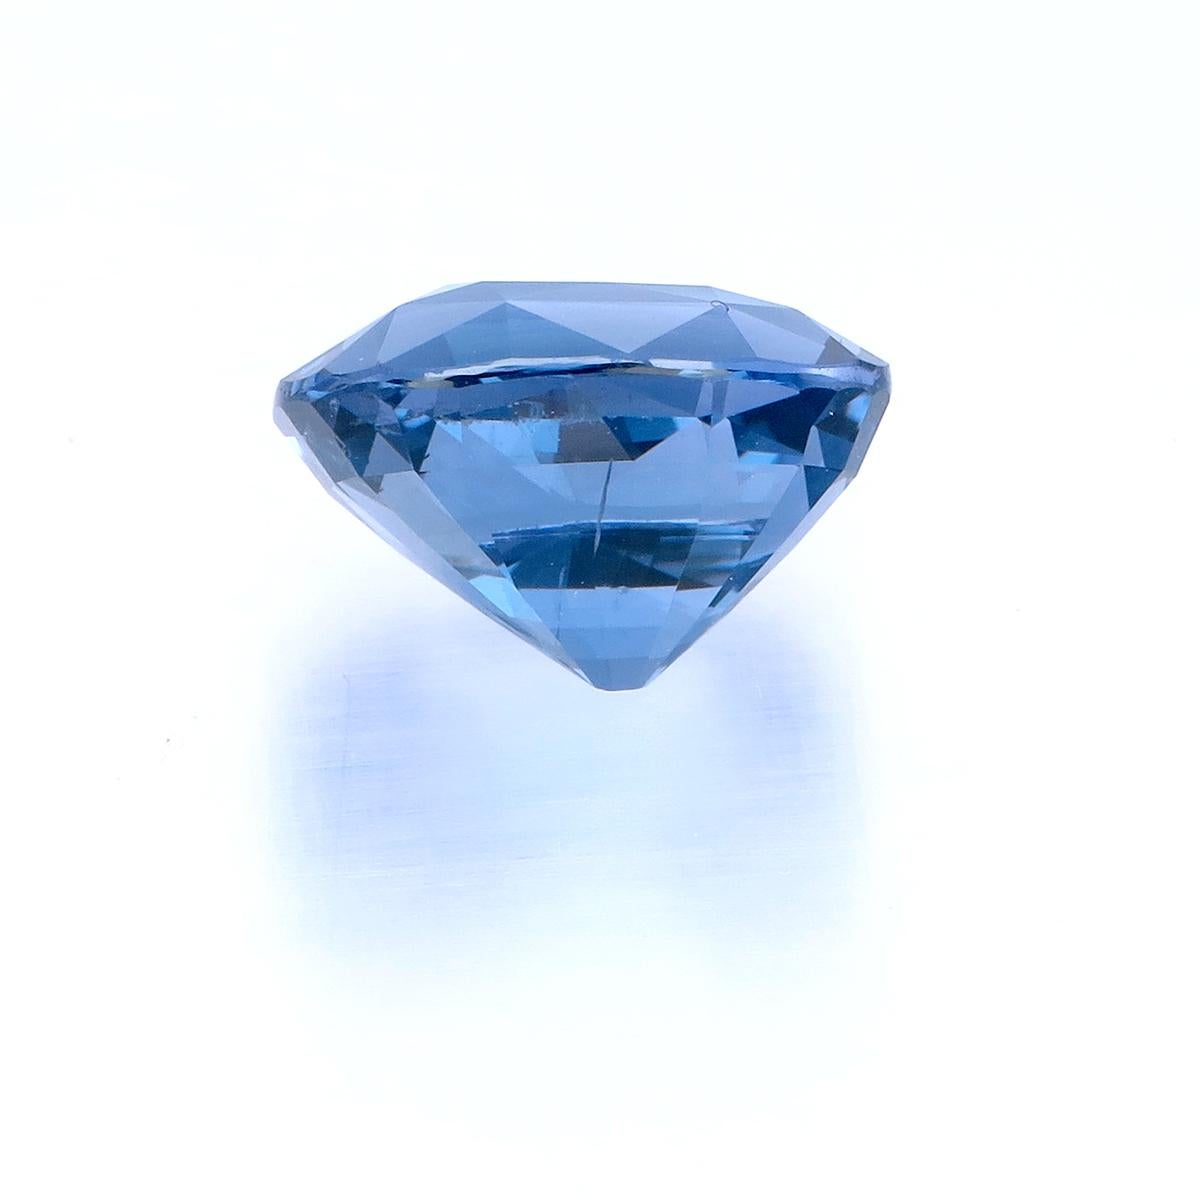 This spinel has been blessed with the rare Color-Change phenomena, 
oscillating between a delicate Violet and a tenacious Blue, 
This stone shows an energetic dispersion of color.

;We offer bespoke services to give you a piece, personalized exactly